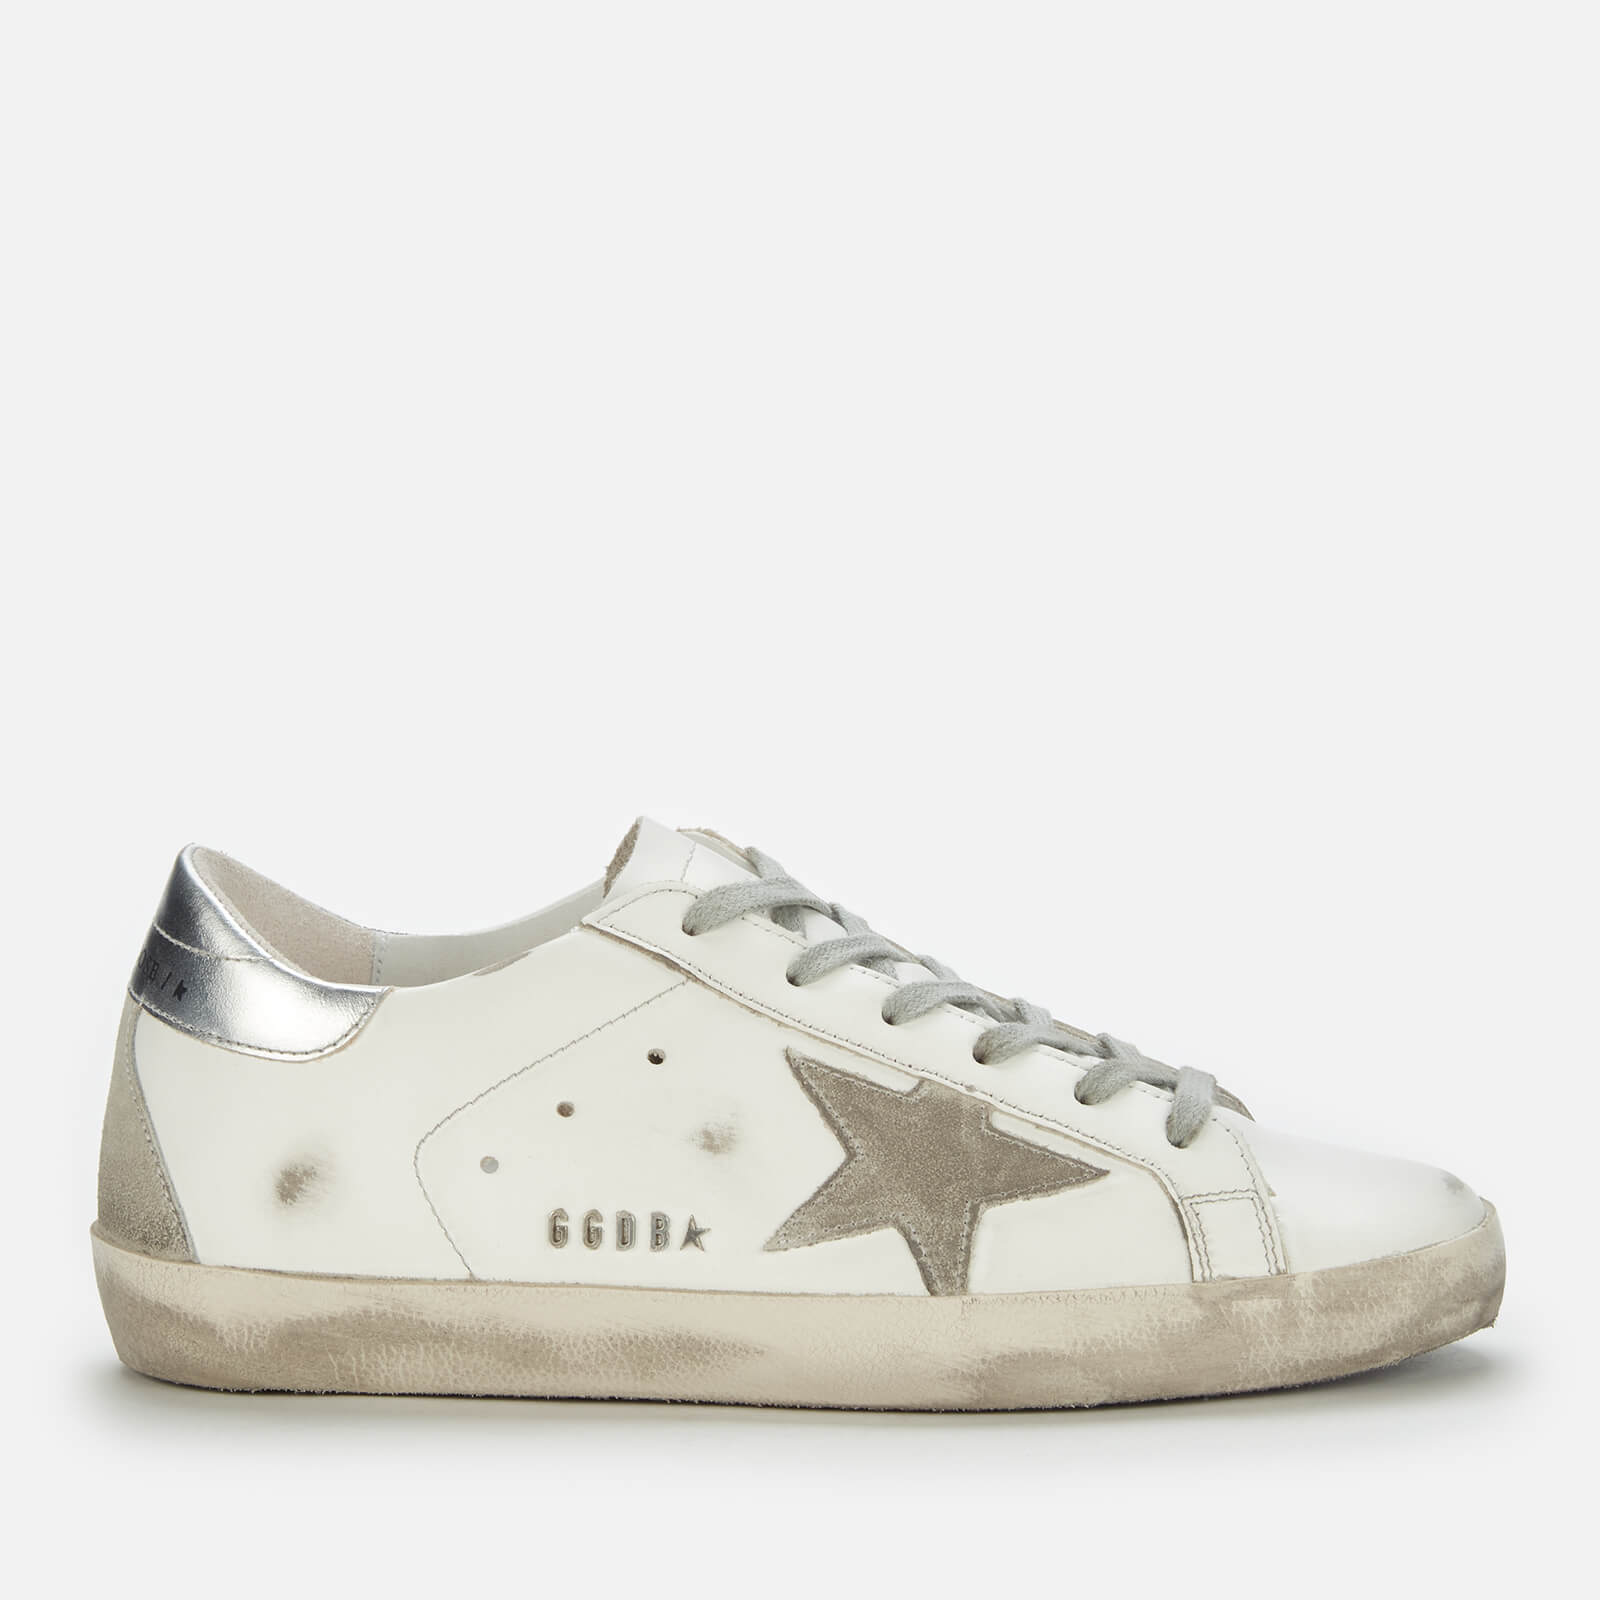 Golden Goose Deluxe Brand Women's Superstar Leather Trainers - White/Ice/Silver - UK 8